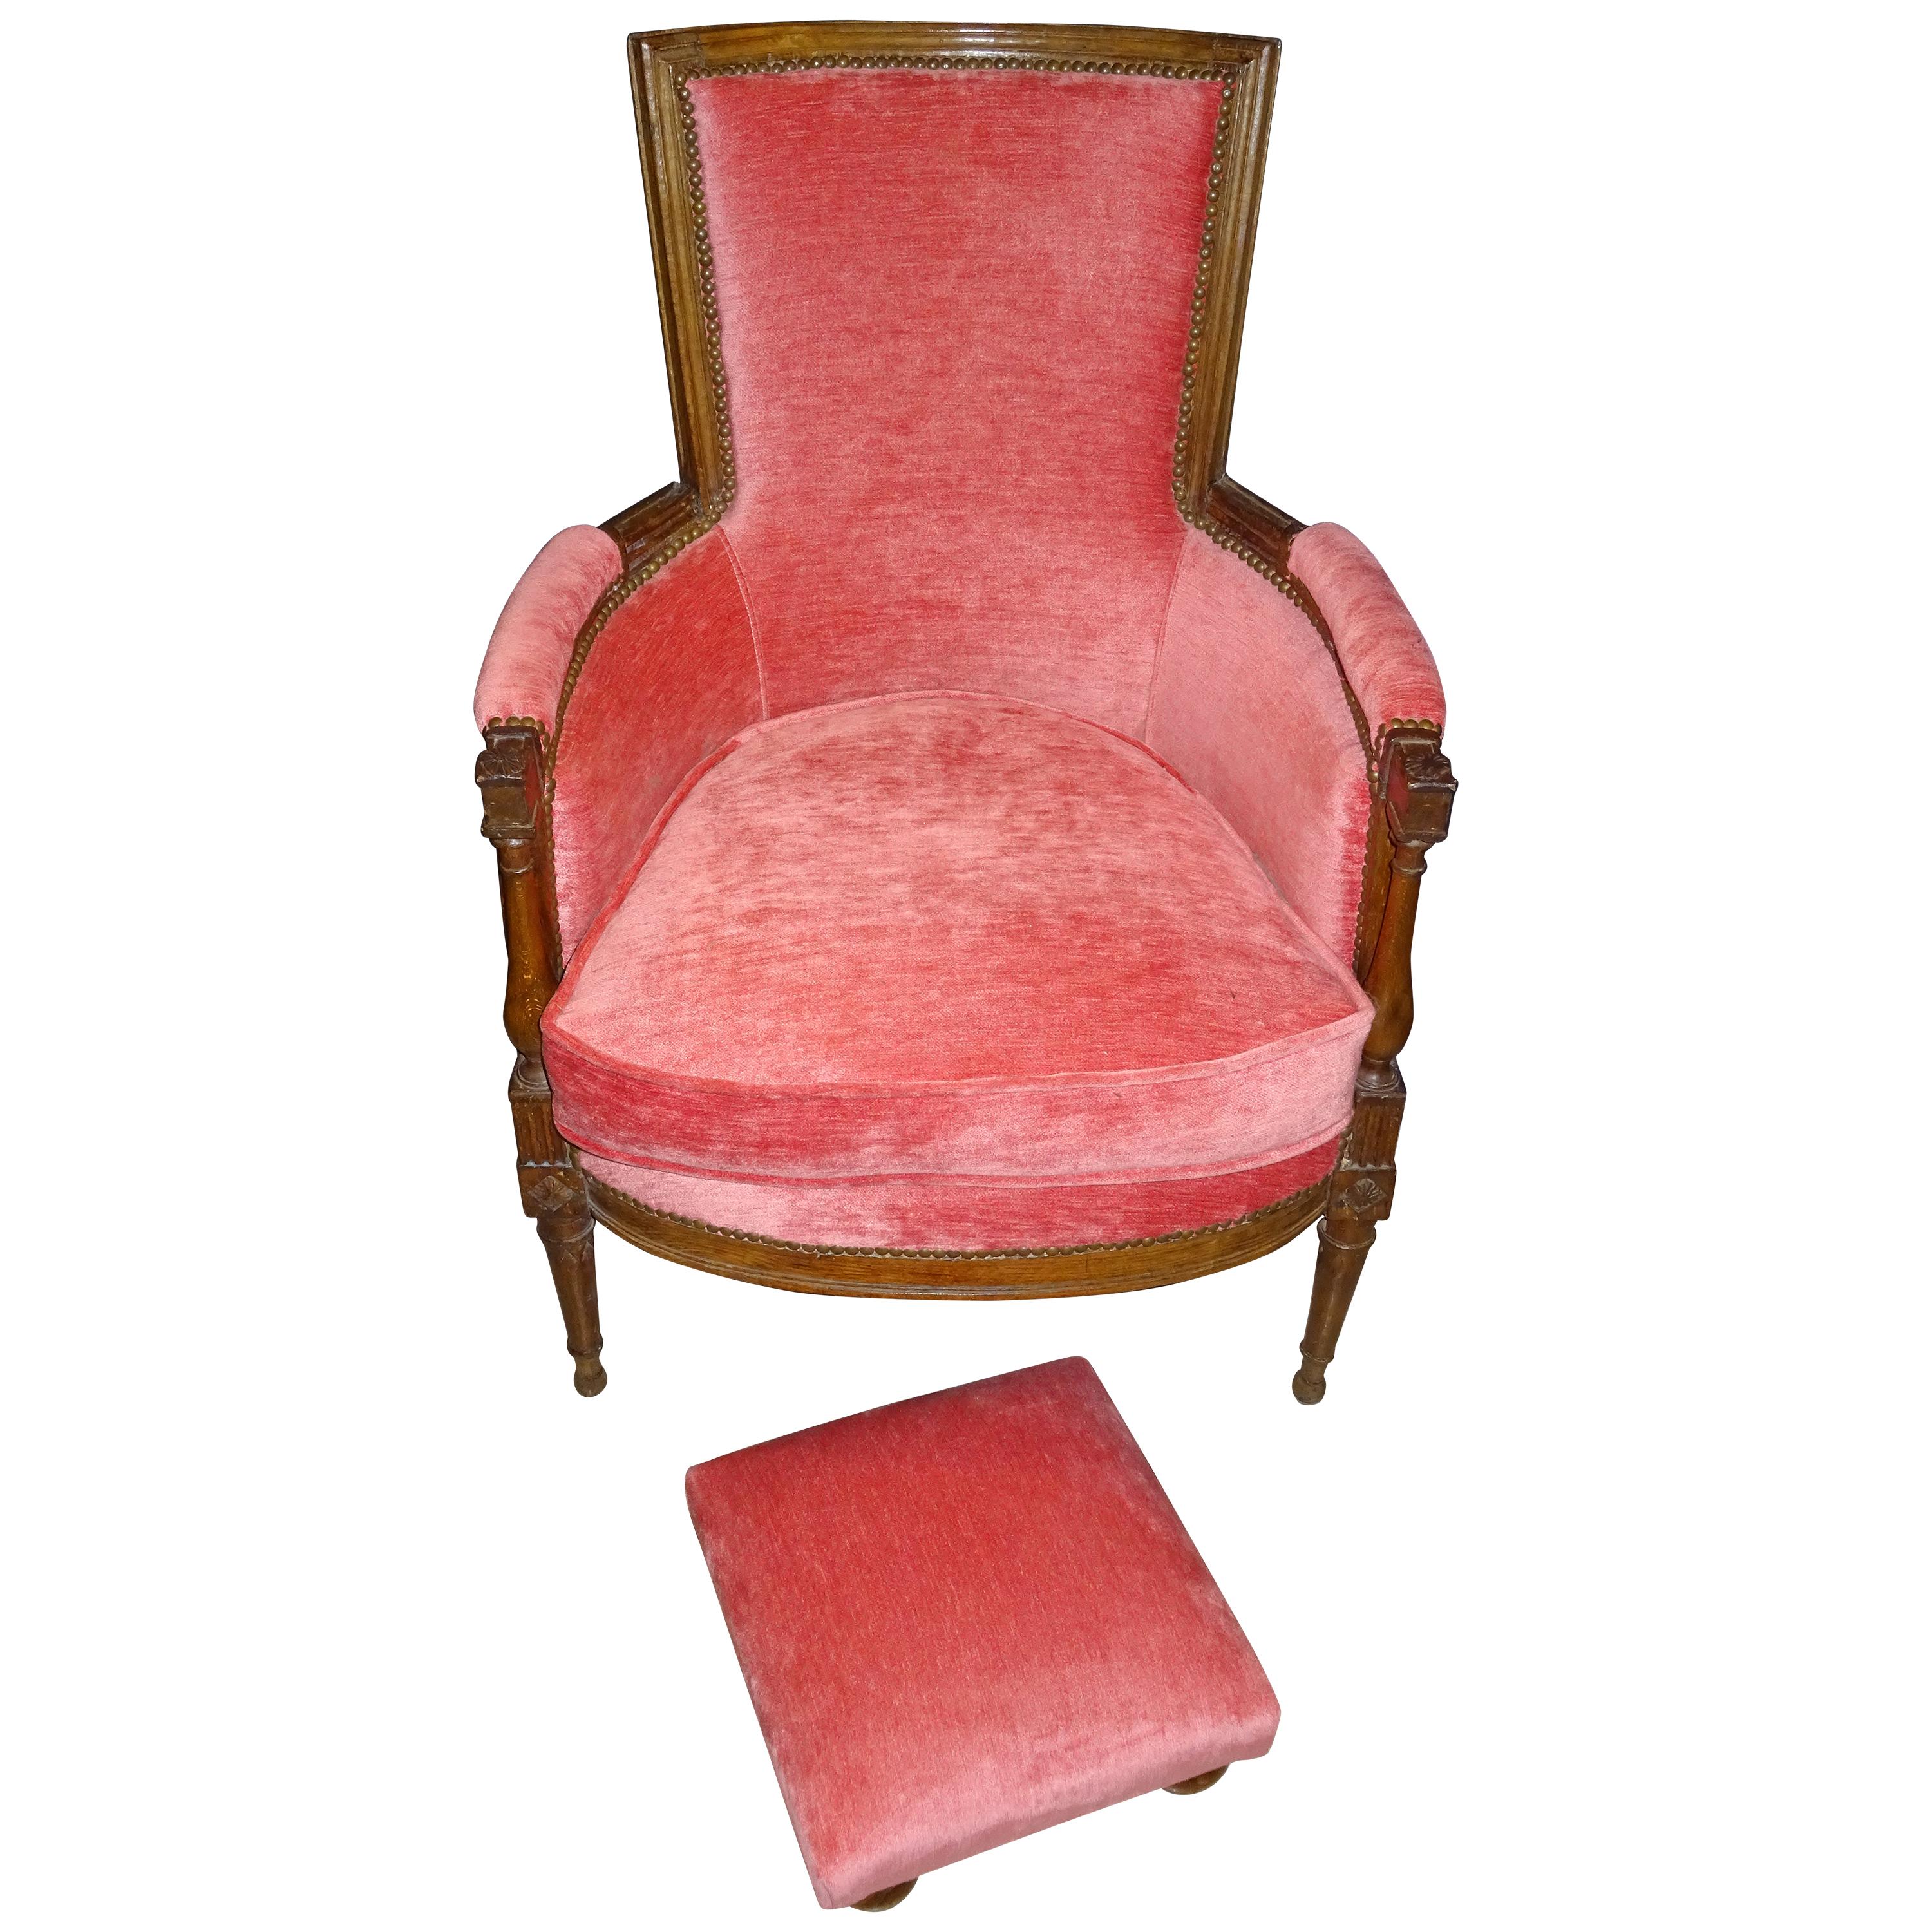 Luis xvi French Walnut Wood and Pink Velvet Bergere Chair, circa 1790